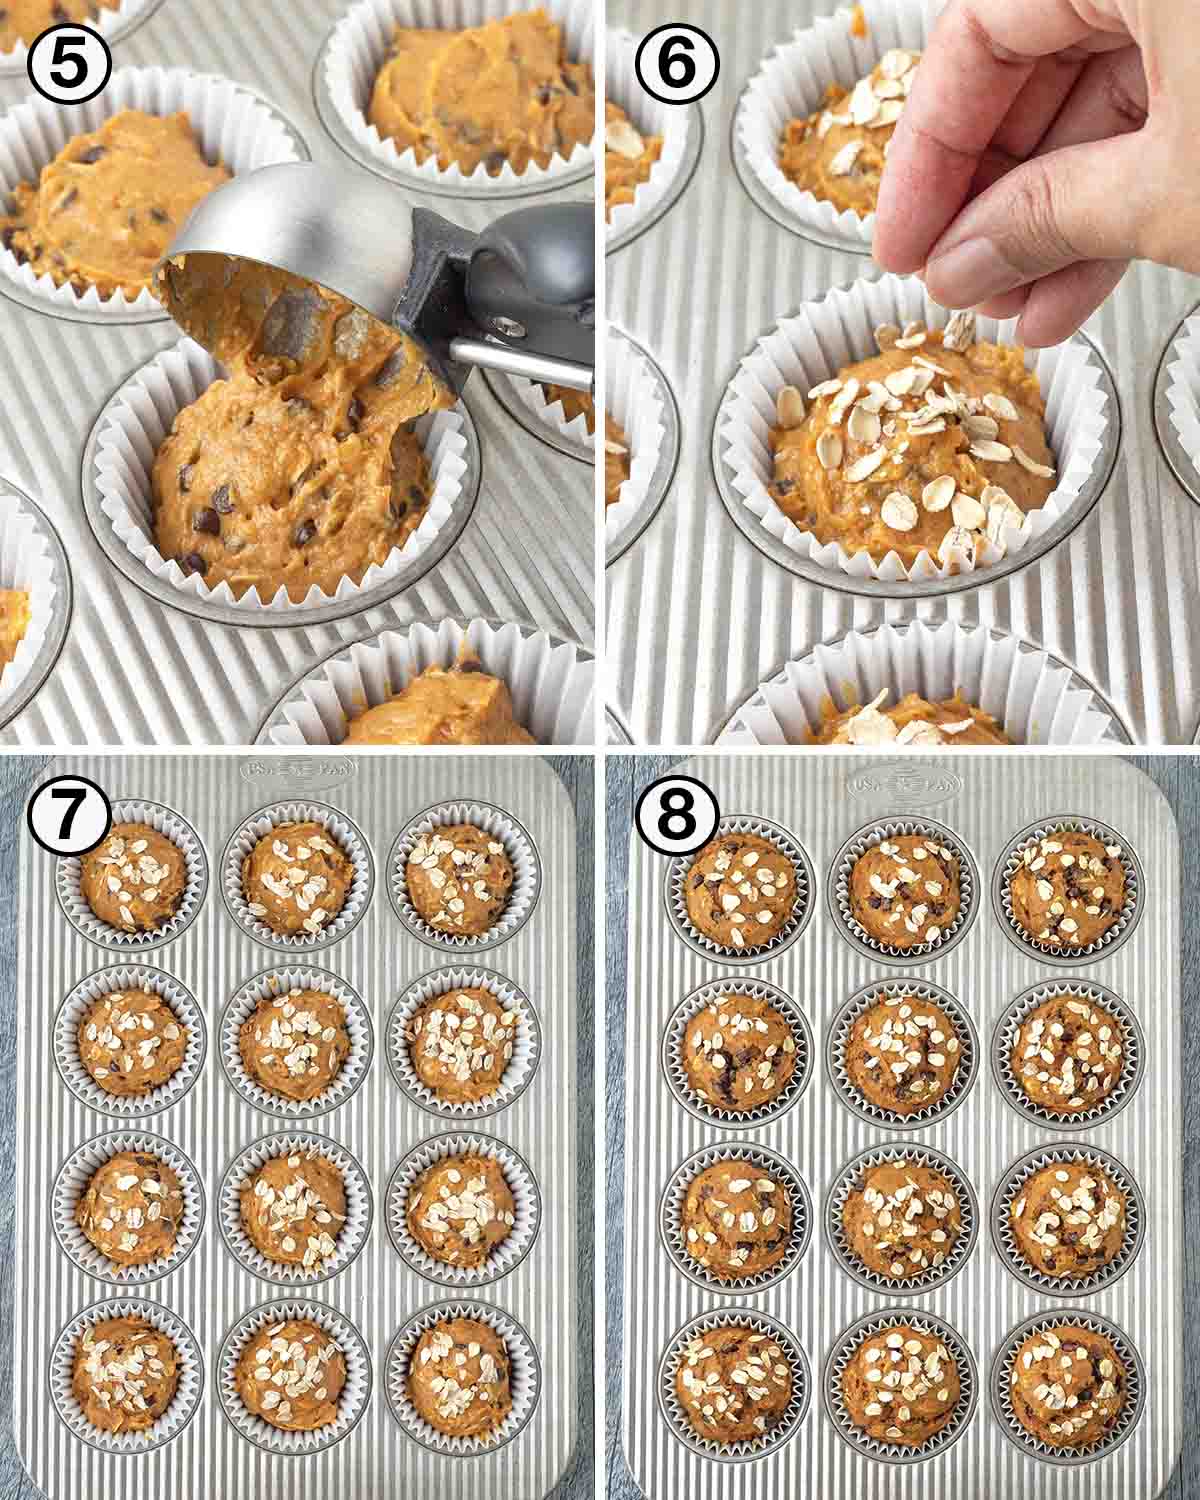 A collage of four images showing the second sequence of steps needed to make vegan pumpkin oatmeal muffins.